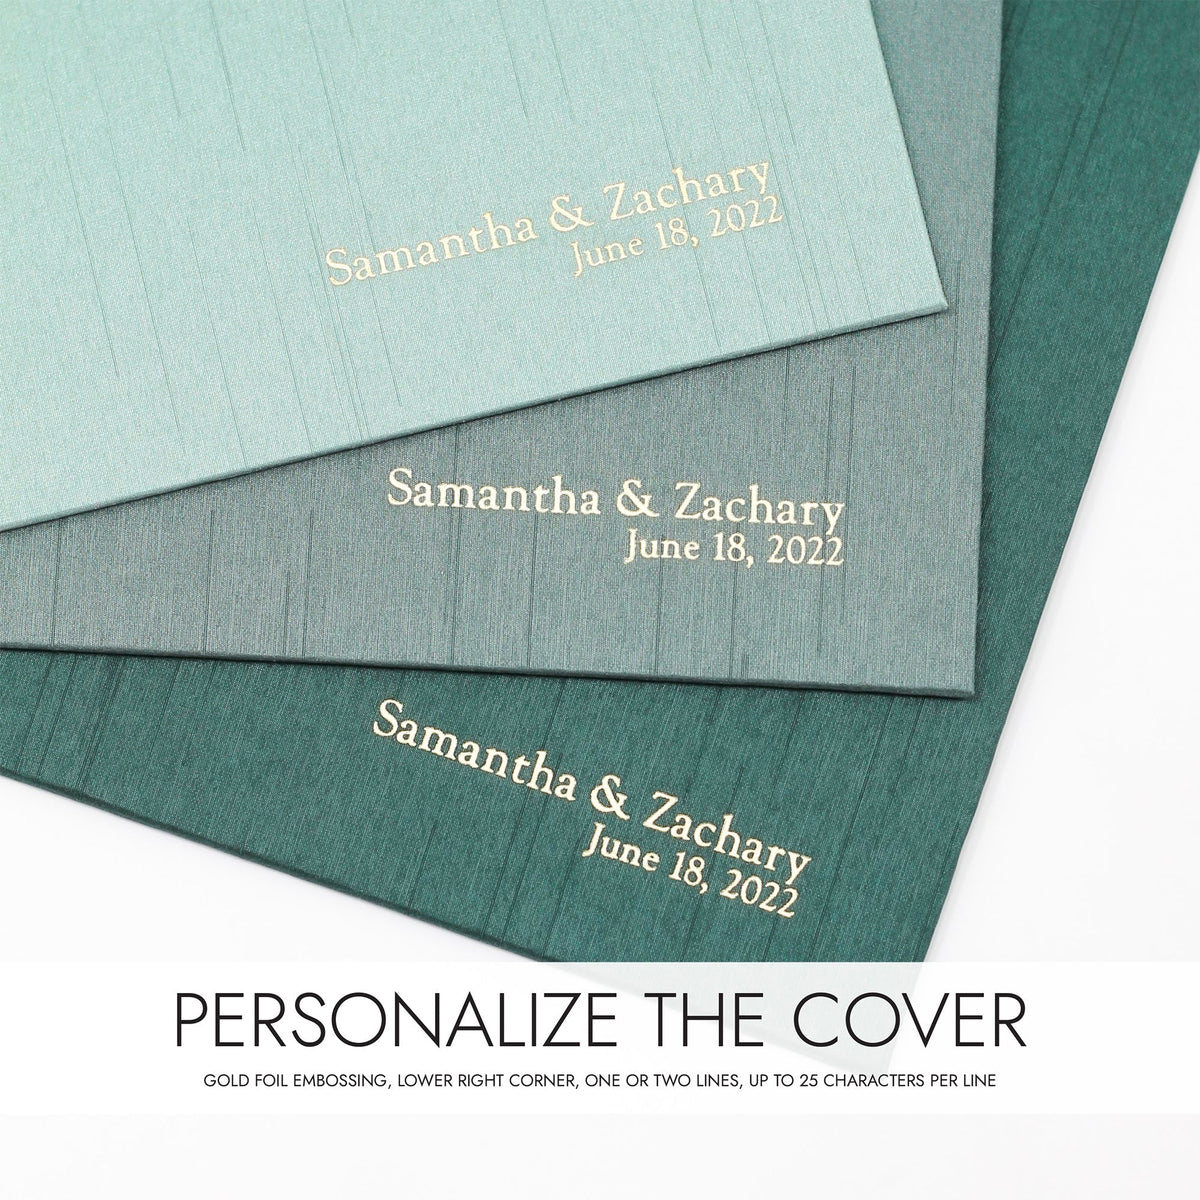 Large Photo Binder (for 4x6 photos) with Teal Silk Cover